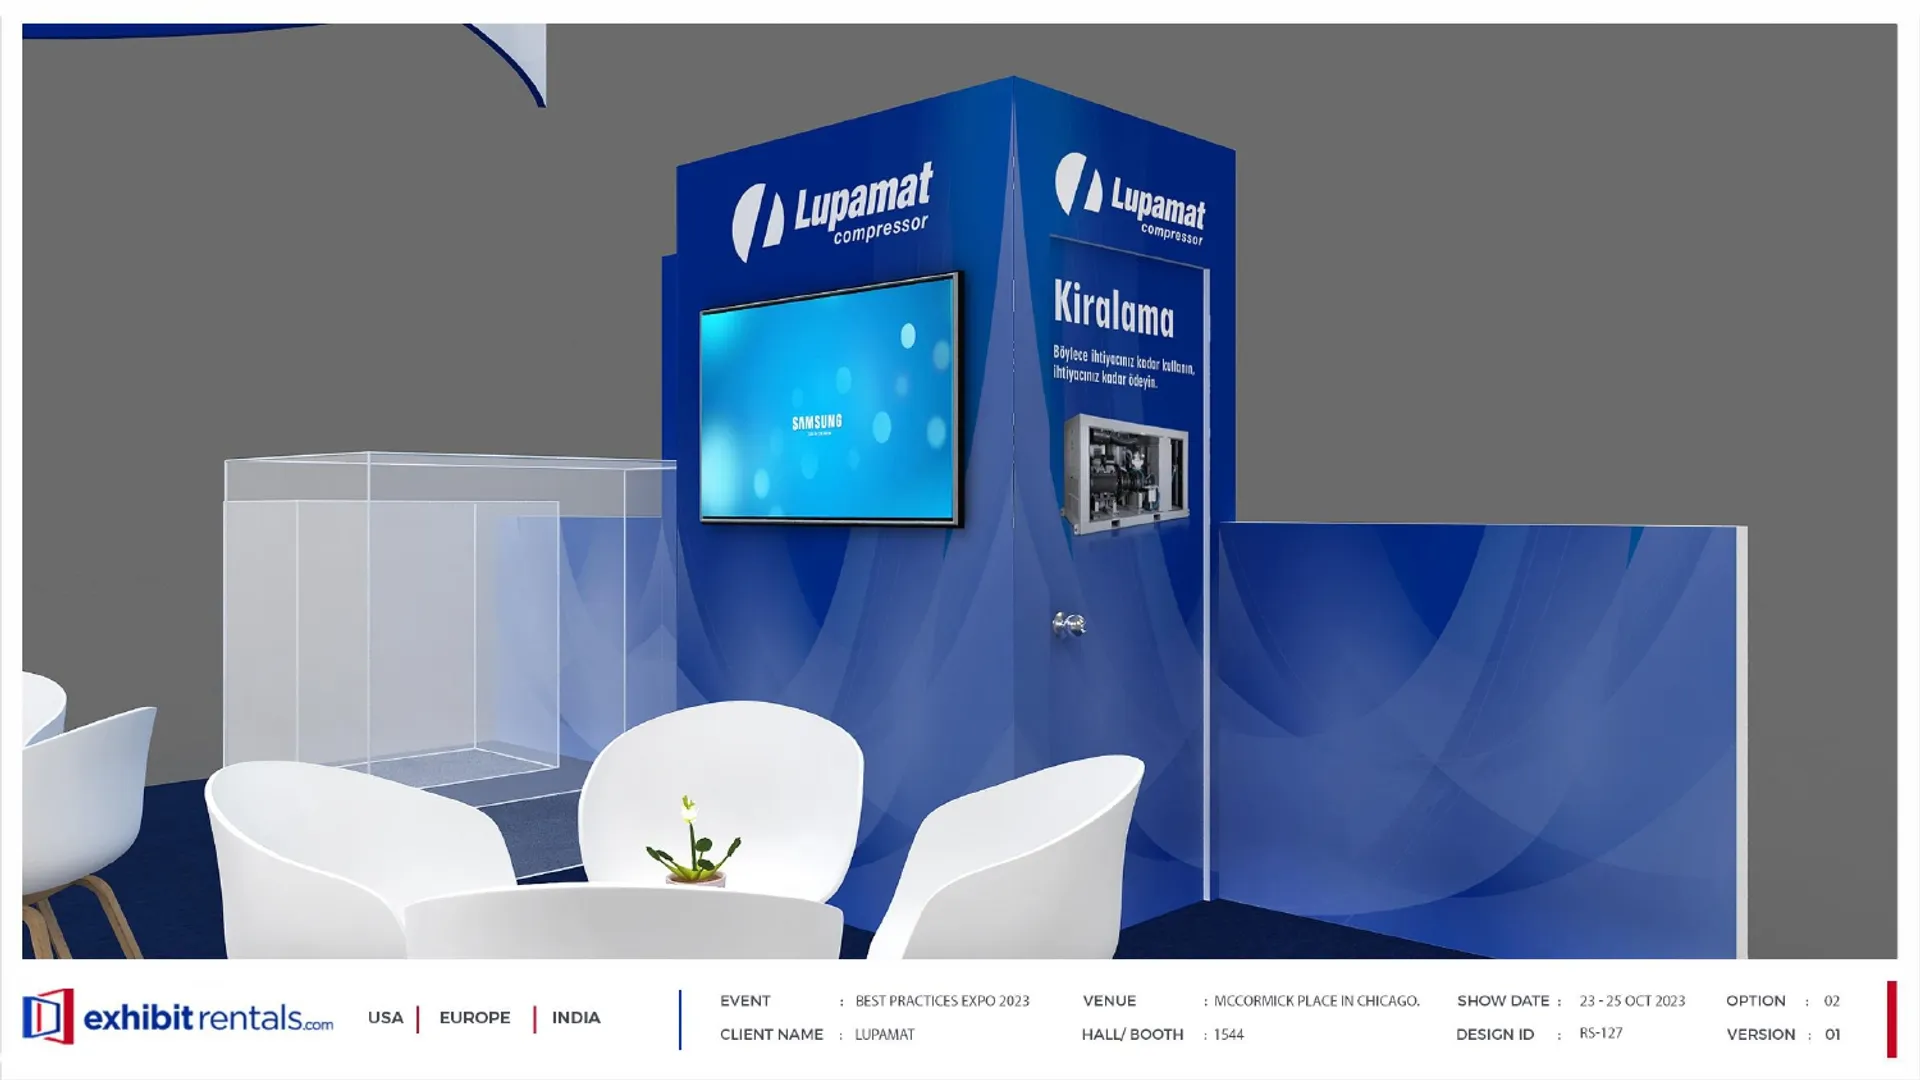 booth-design-projects/Exhibit-Rentals/2024-04-18-40x40-PENINSULA-Project-99/2.1_Lupamat_Best practices expo_ER design proposal-18_page-0001-60rvve.jpg